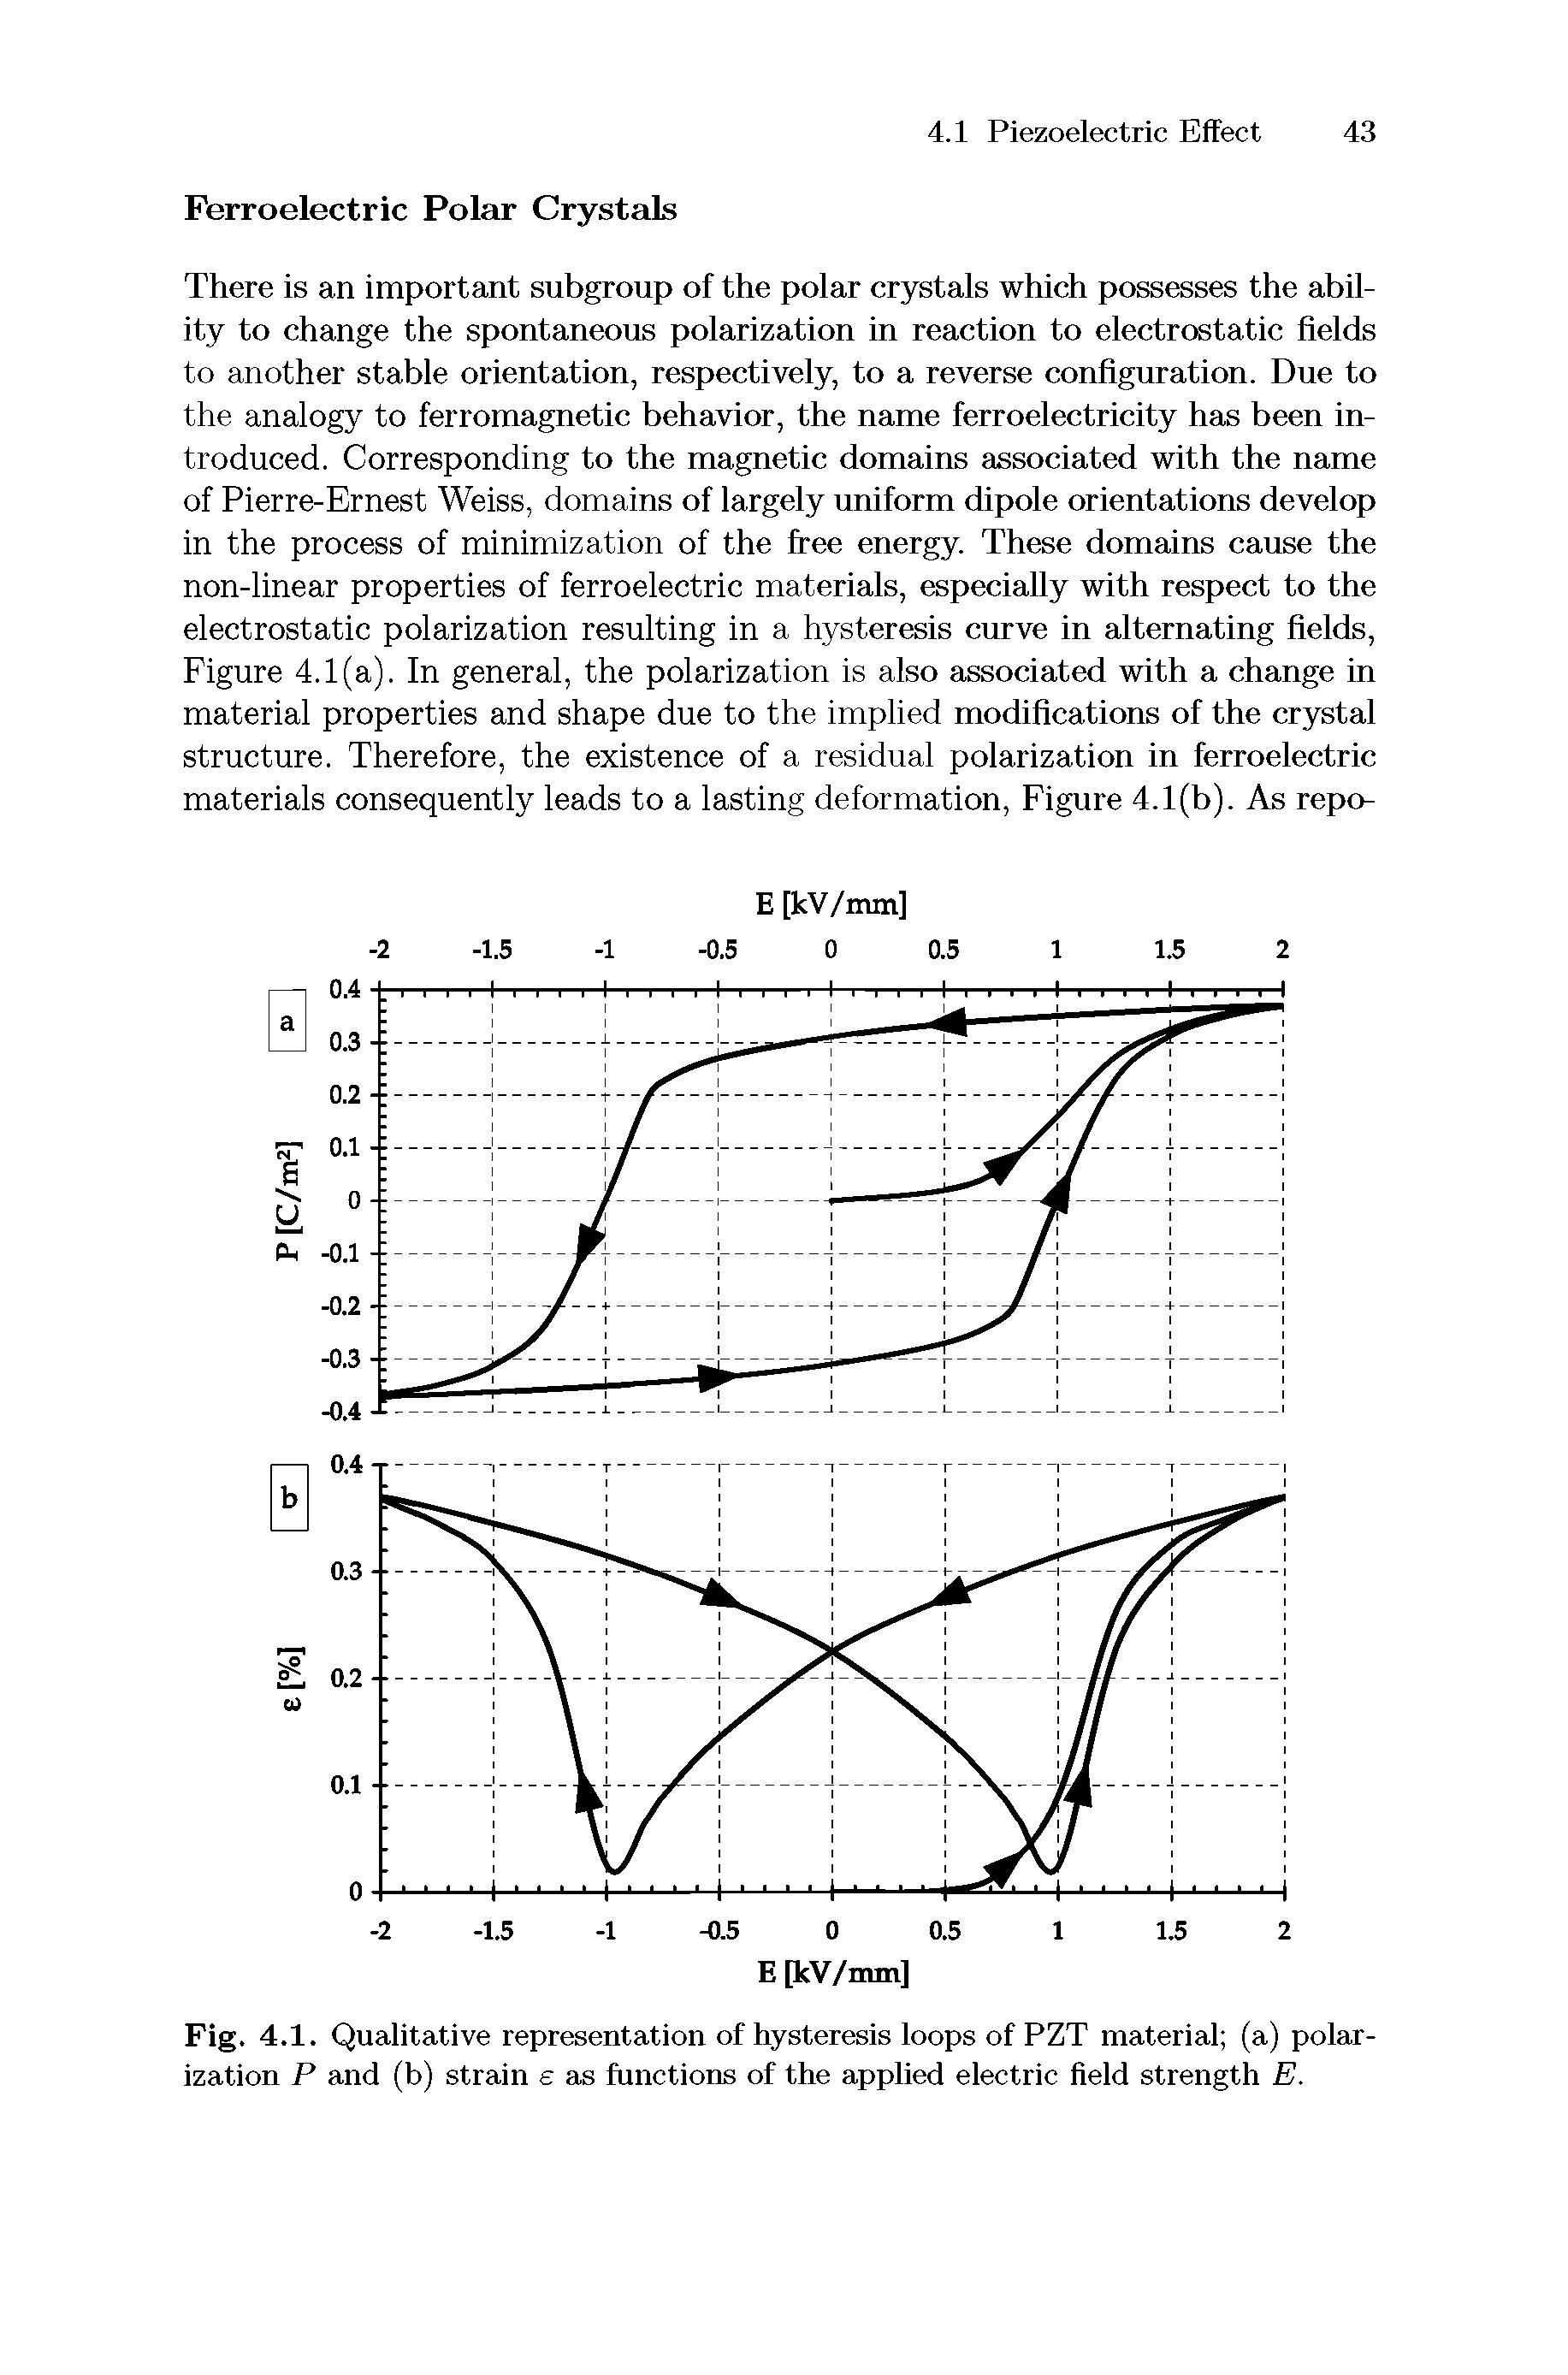 Fig. 4.1. Qualitative representation of hysteresis loops of PZT material (a) polarization P and (b) strain e as functions of the applied electric field strength E.